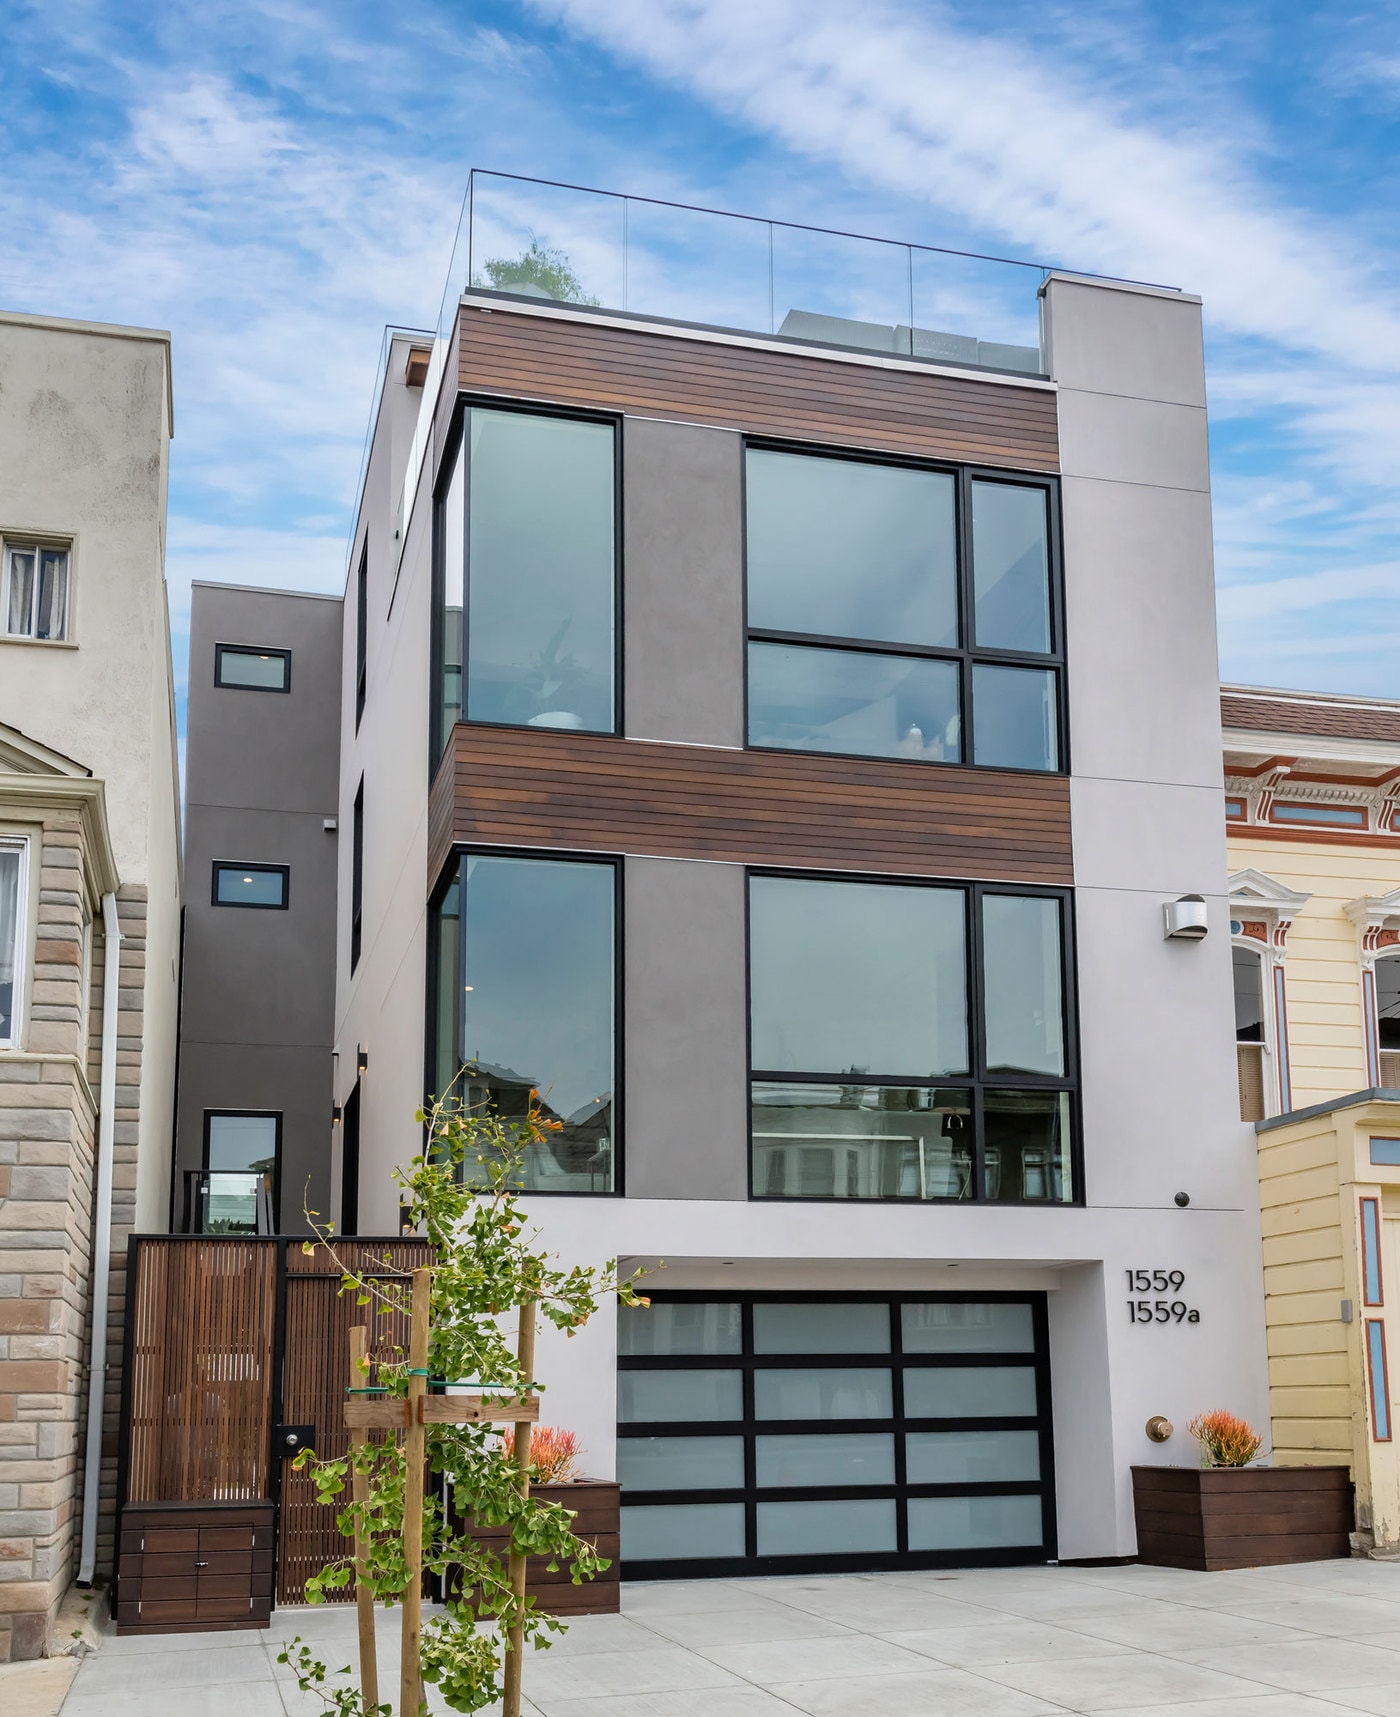 1559 Church Street, A Contemporary, Light-Filled Home In Noe Valley, San Francisco | Shamrock Real Estate